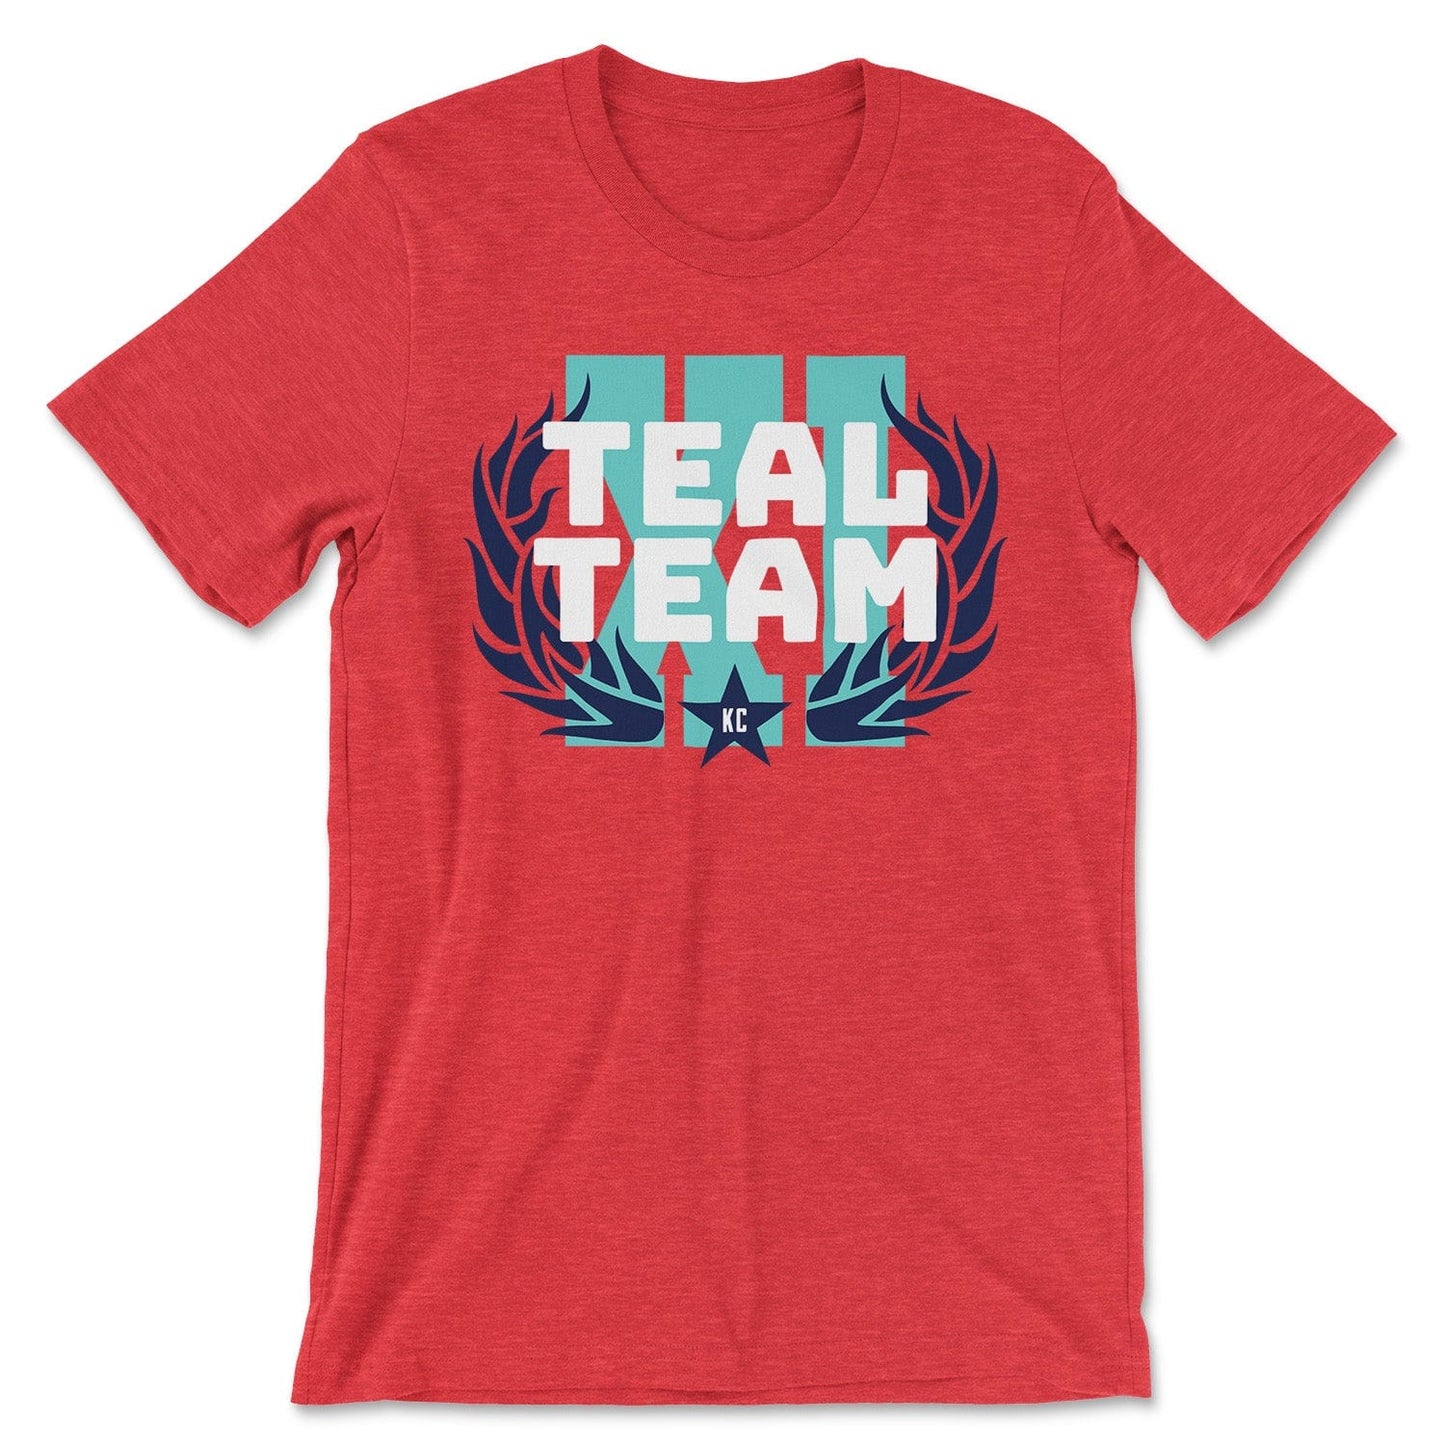 KC Swag Kansas City Current TEAL TEAM X! on heather red unisex t-shirt